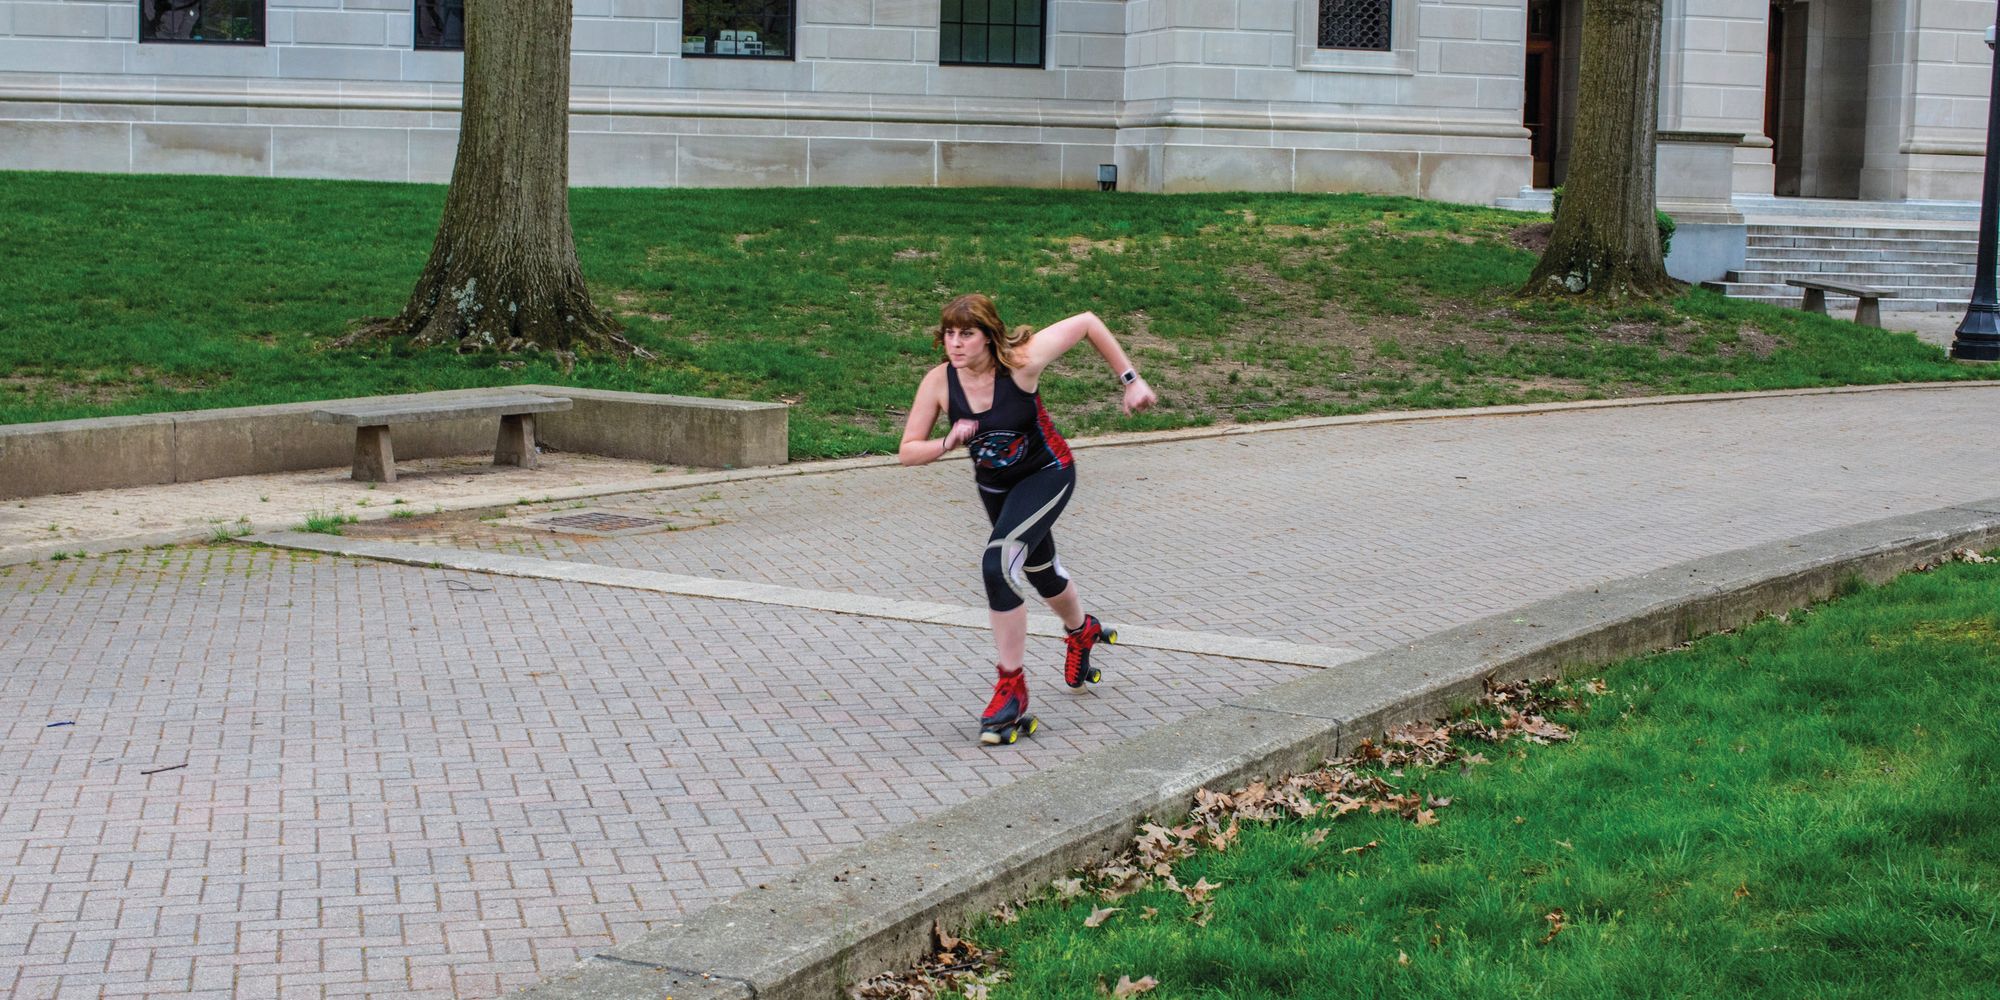 Mindy Parsley roller skating at the West Virginia State Capitol.